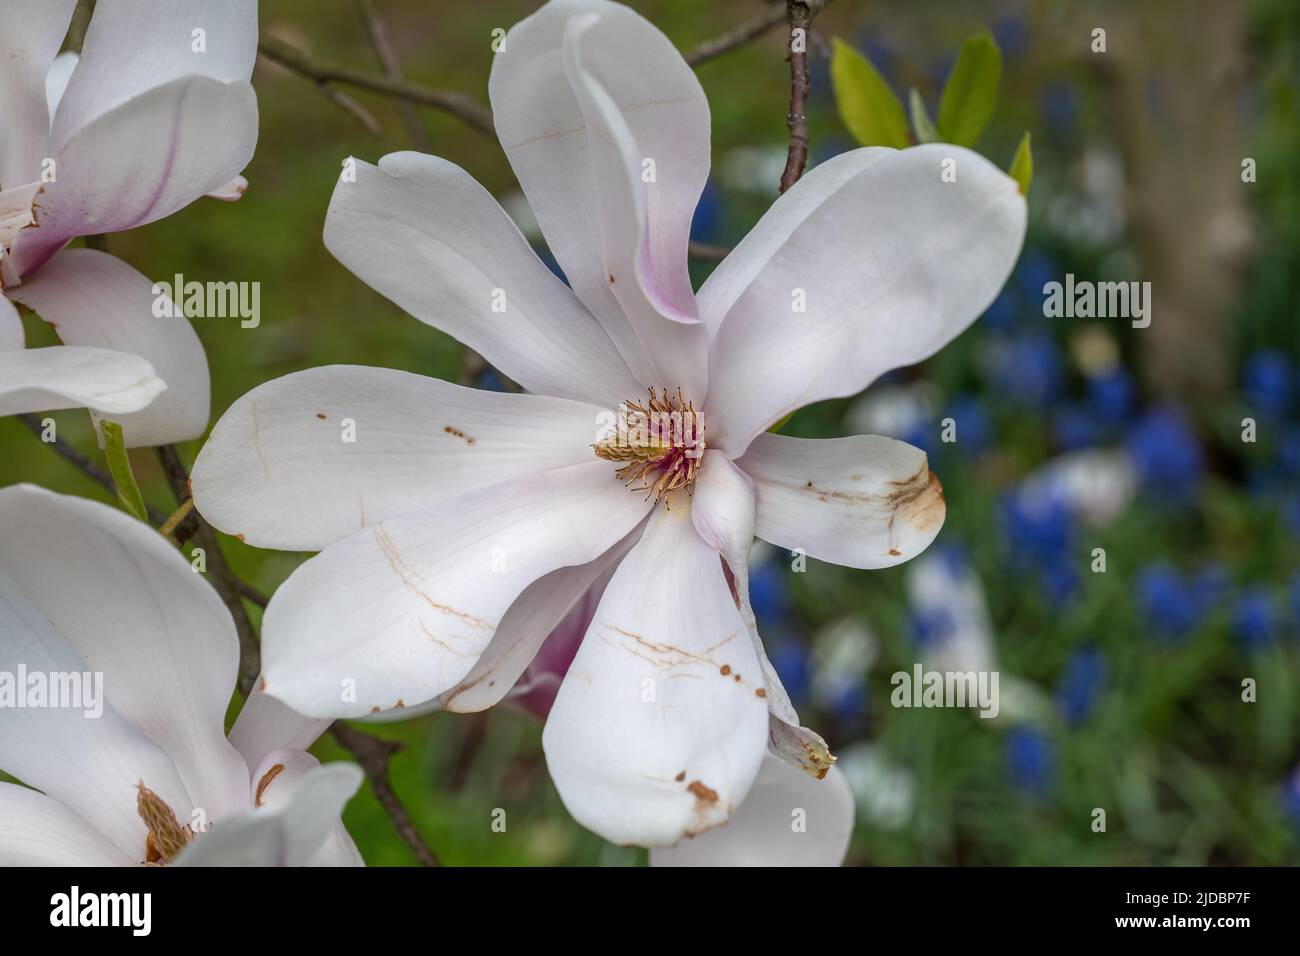 Magnolia x soulangeana 'Alexandrina' blooming flower in spring, plant in the family Magnoliaceae. Stock Photo